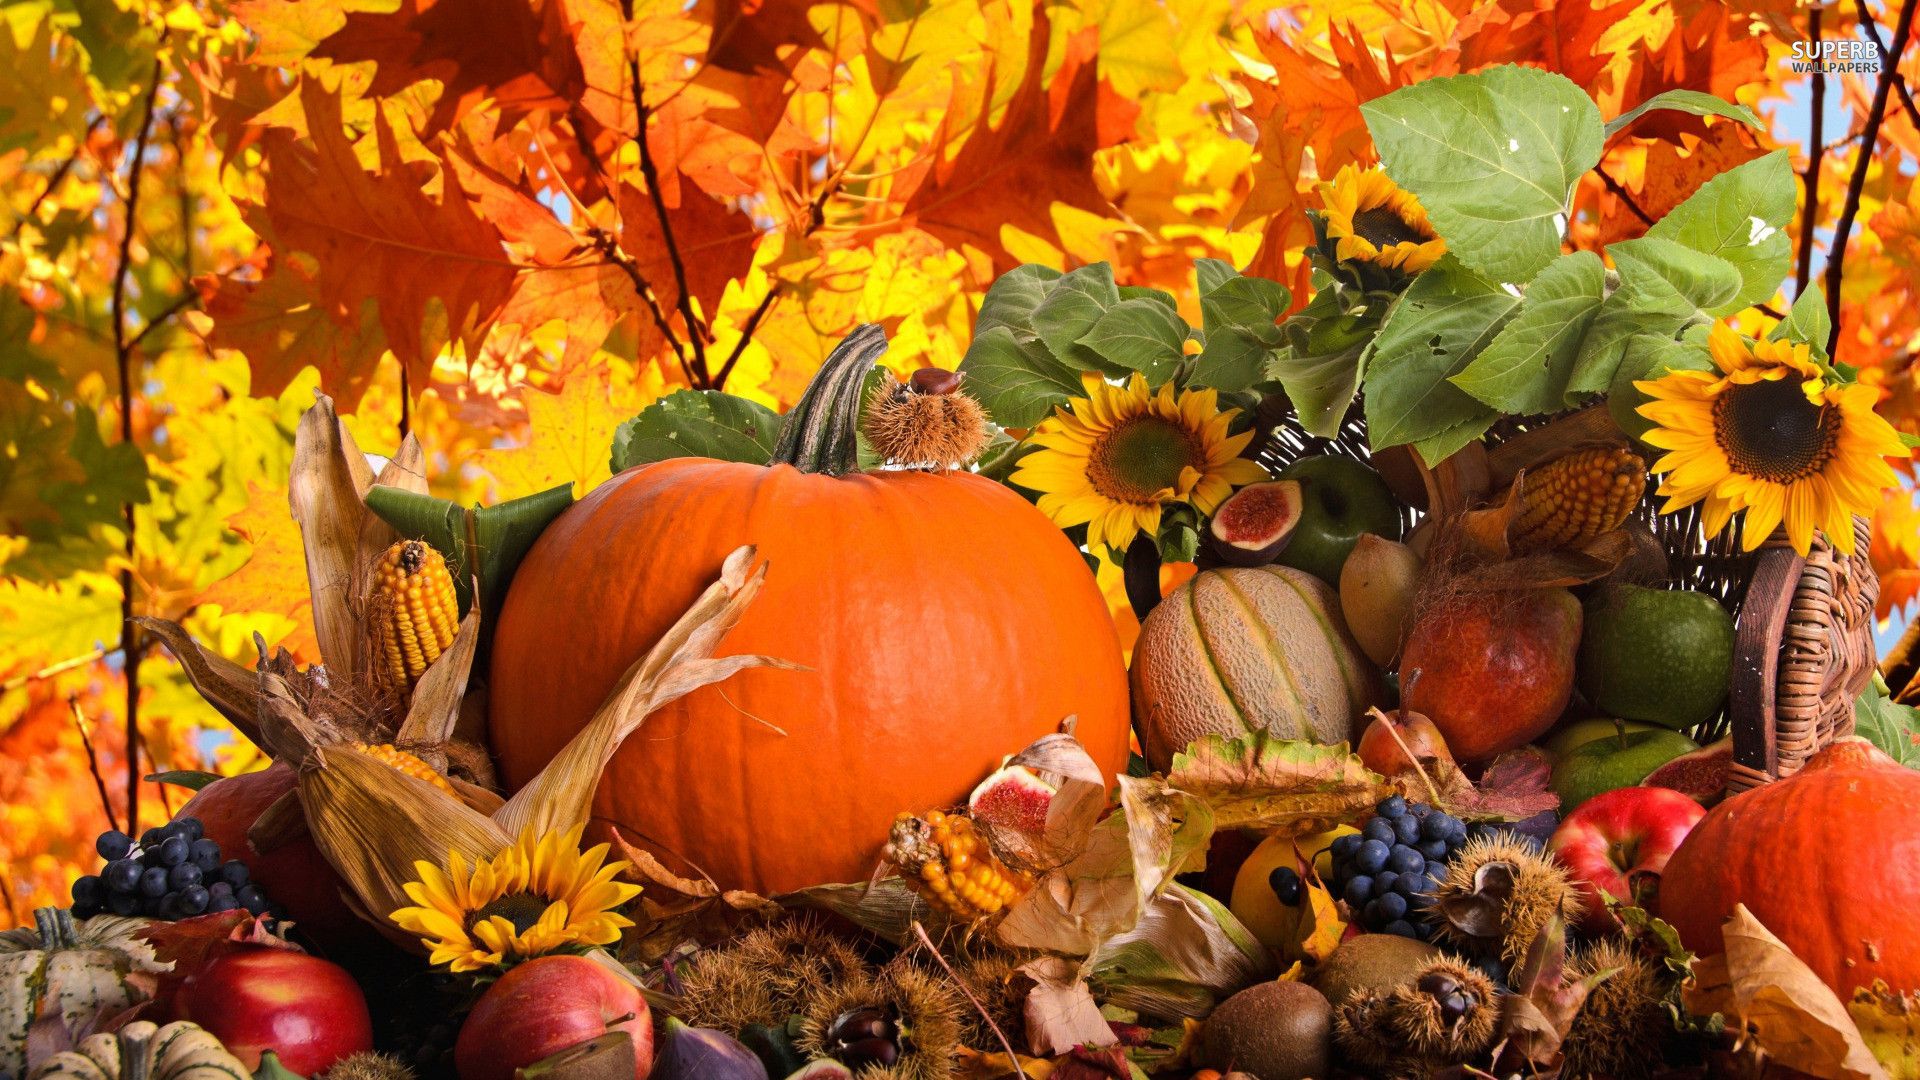 image about Autumn Thanksgiving, Screensaver 1920x1080